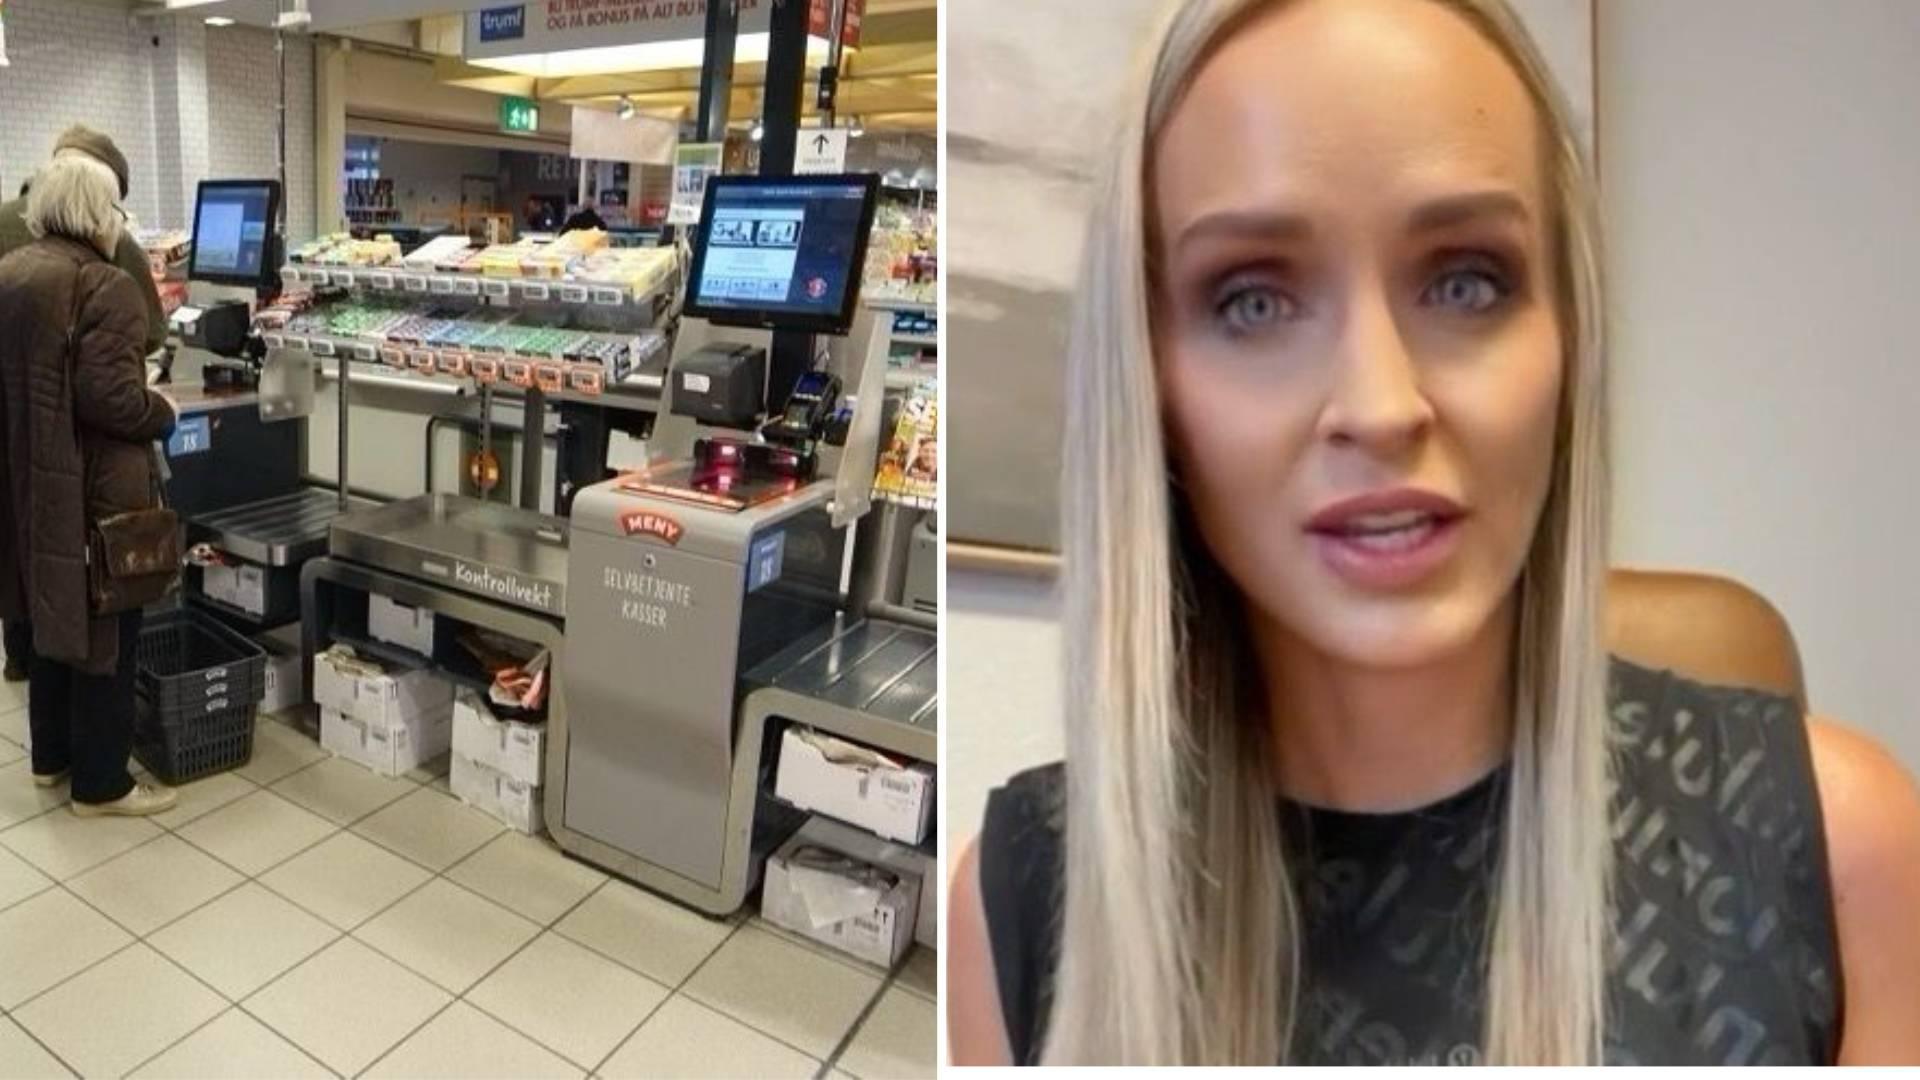 A collage of a self-checkout point and an image of Carrie Jernigan